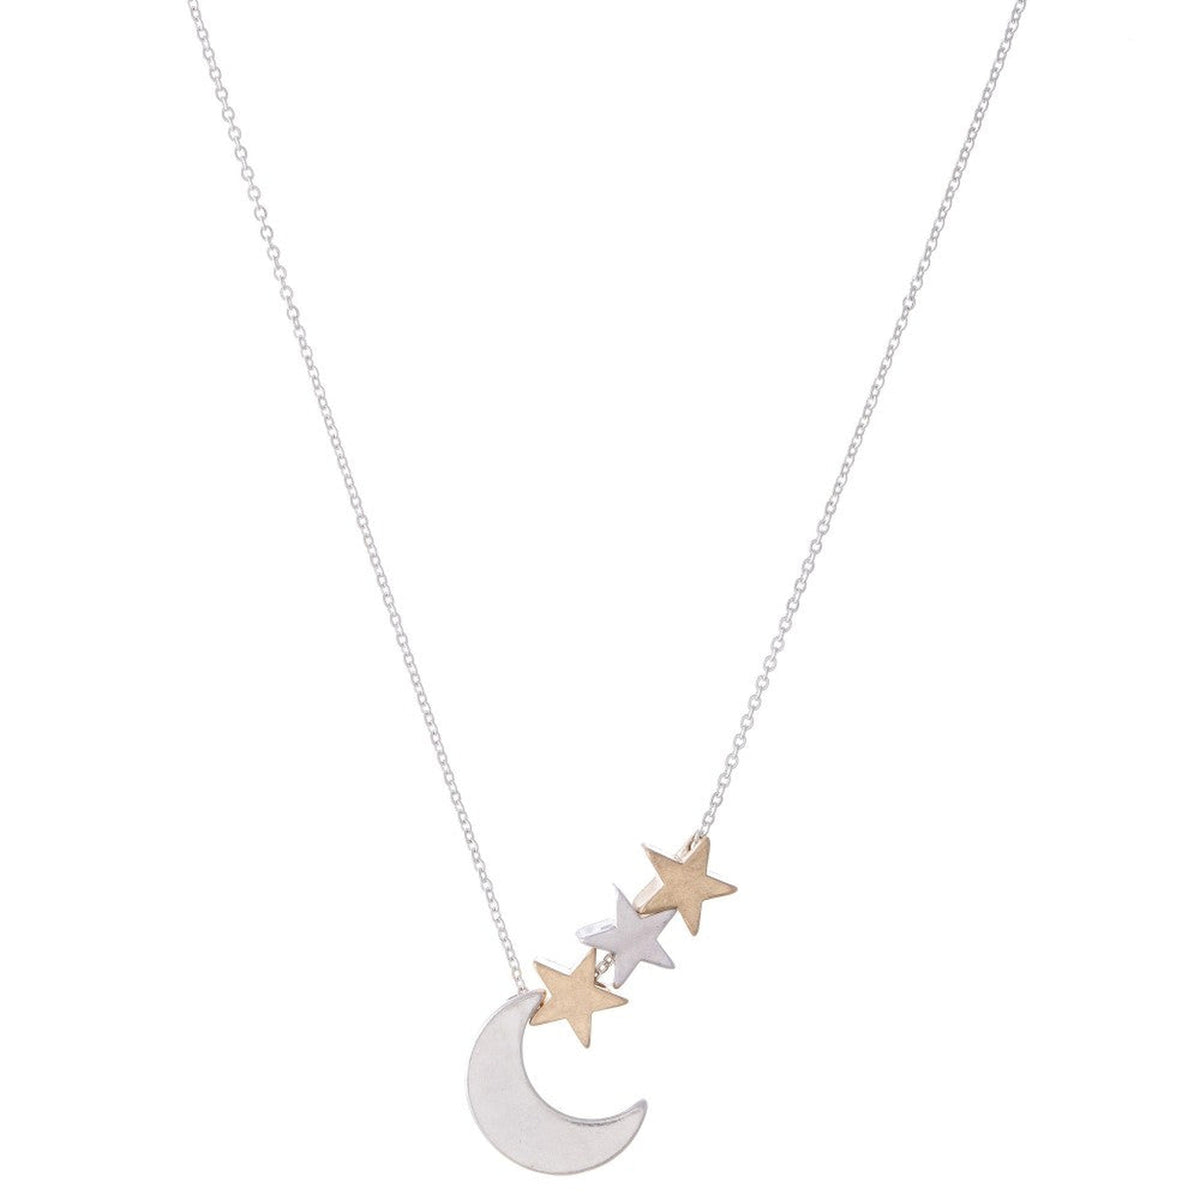 Walking in the Moonlight Necklace